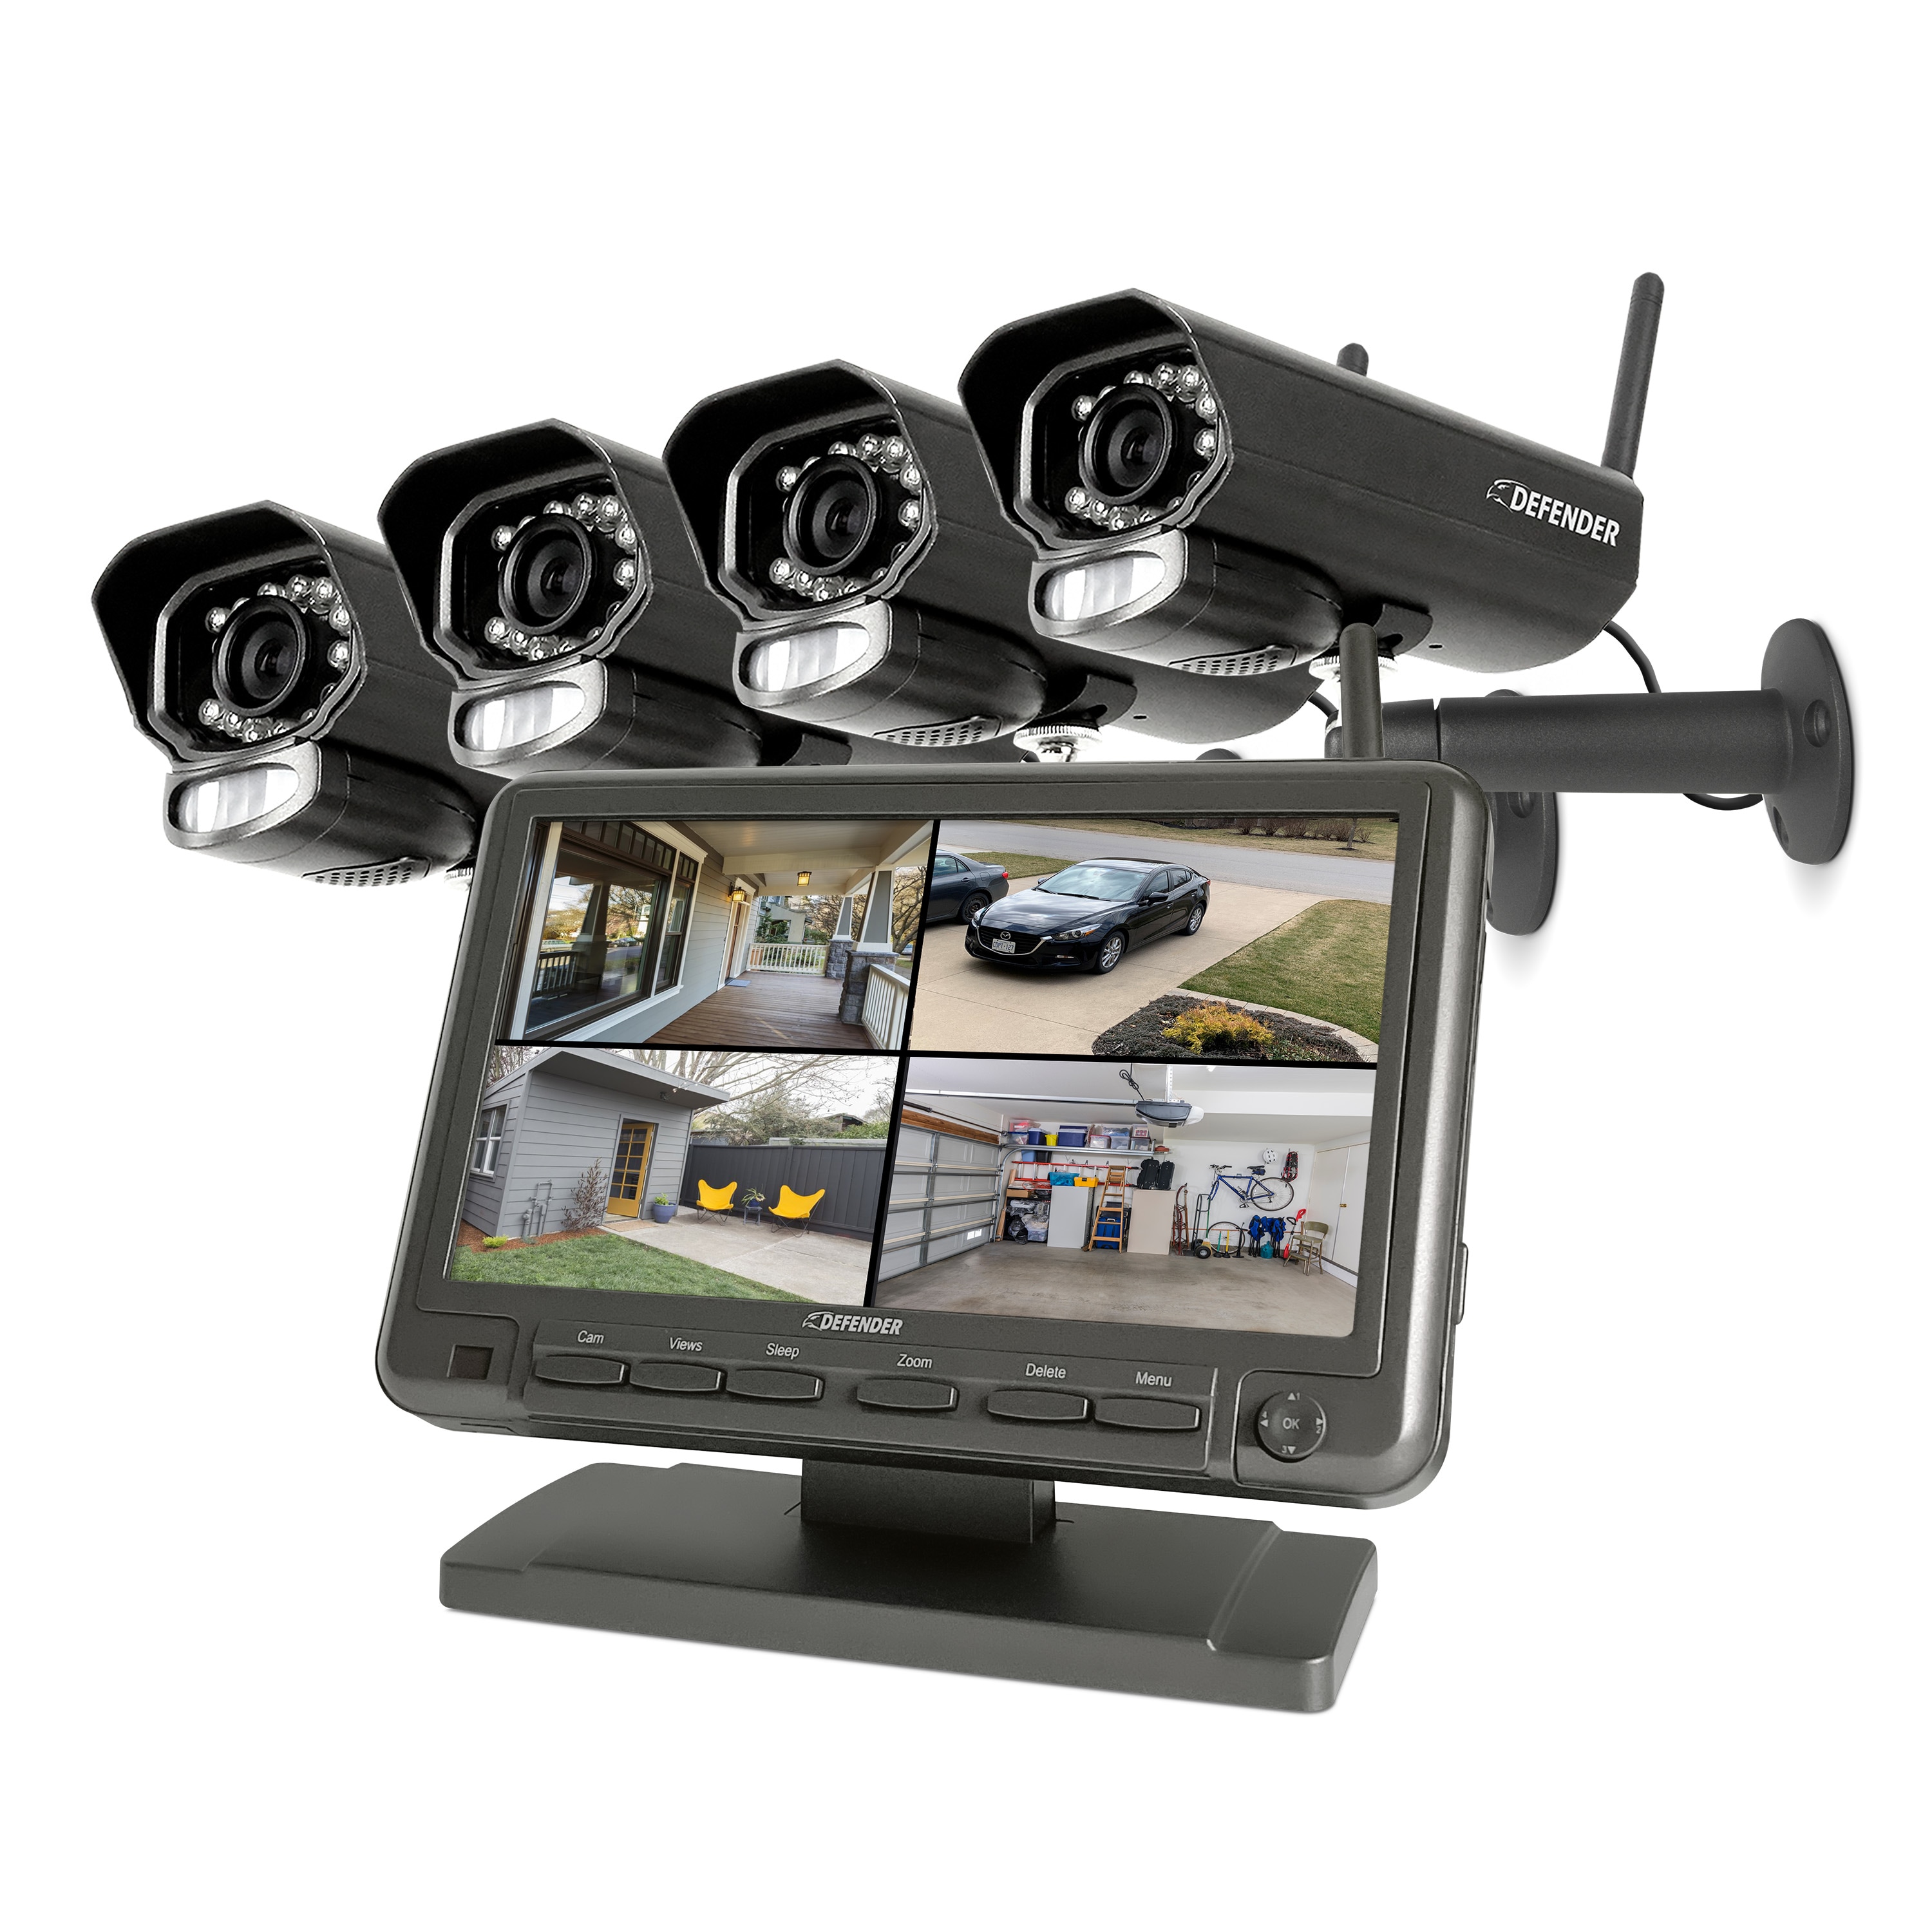 LARGE METAL HOME SECURITY CAMERAS SYSTEM ARE IN USE WARNING YARD FENCE SIGNS 